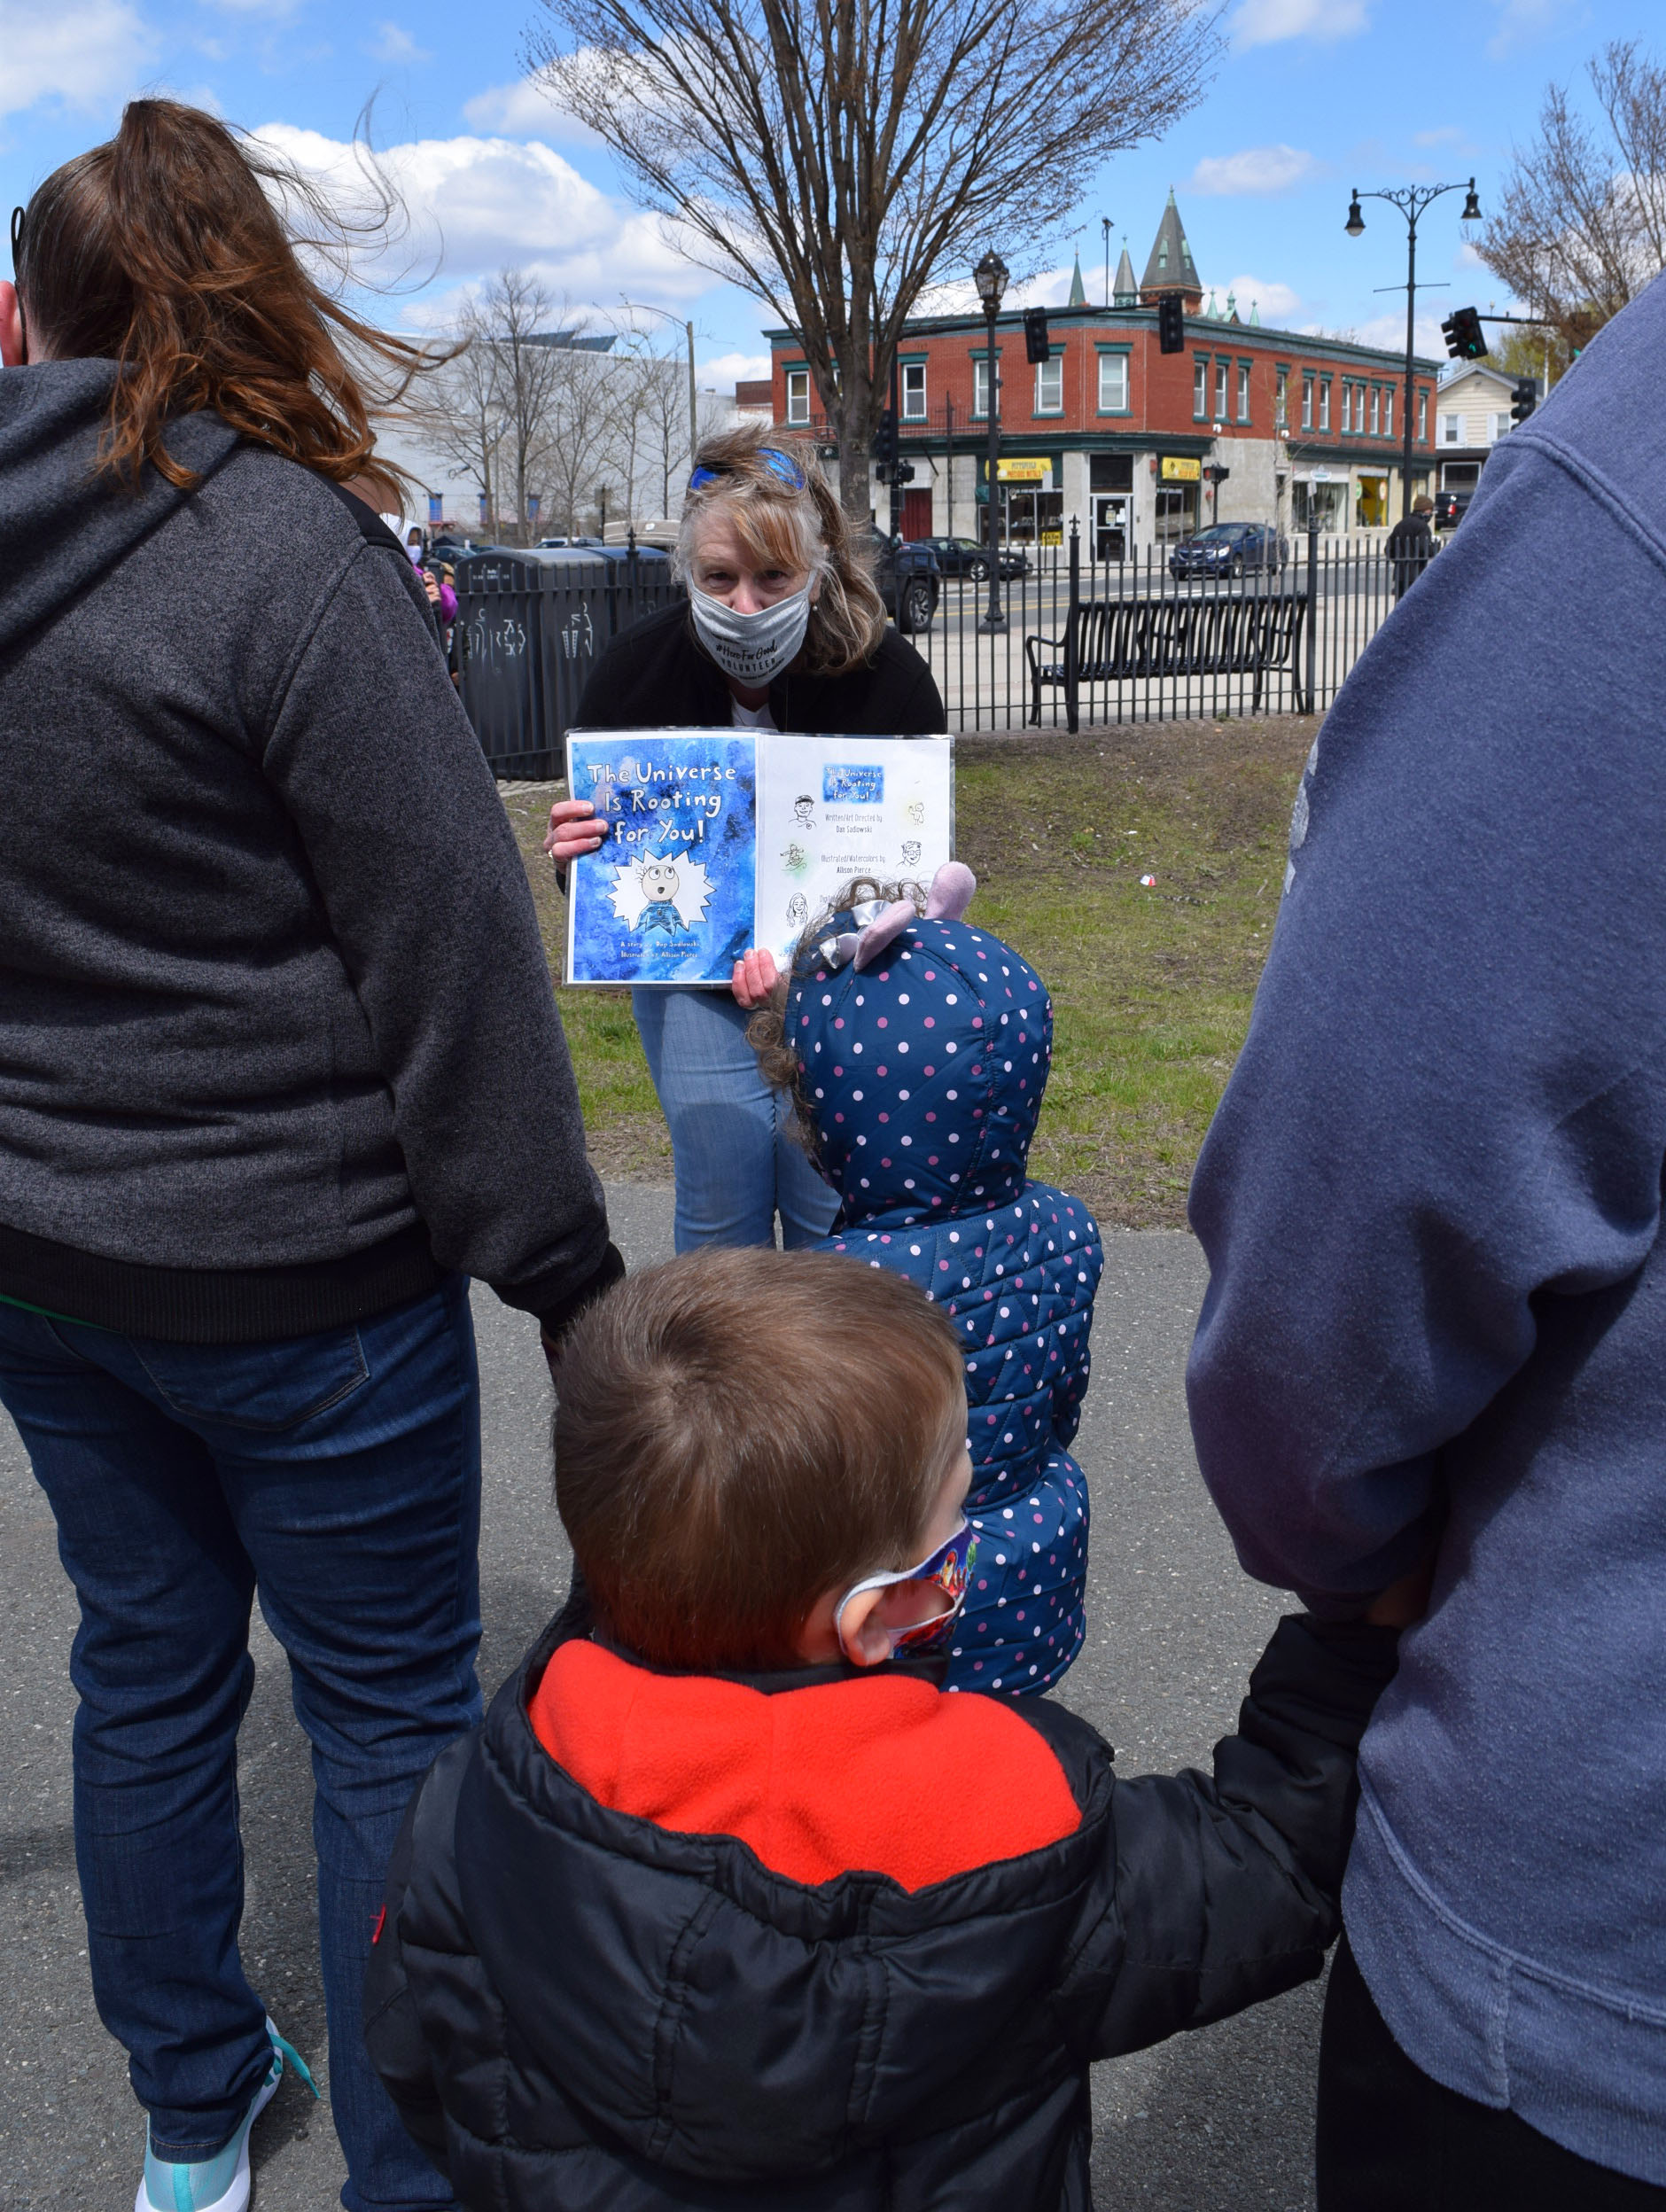 Bringing the StoryWalk™ to the Commons in Pittsfield